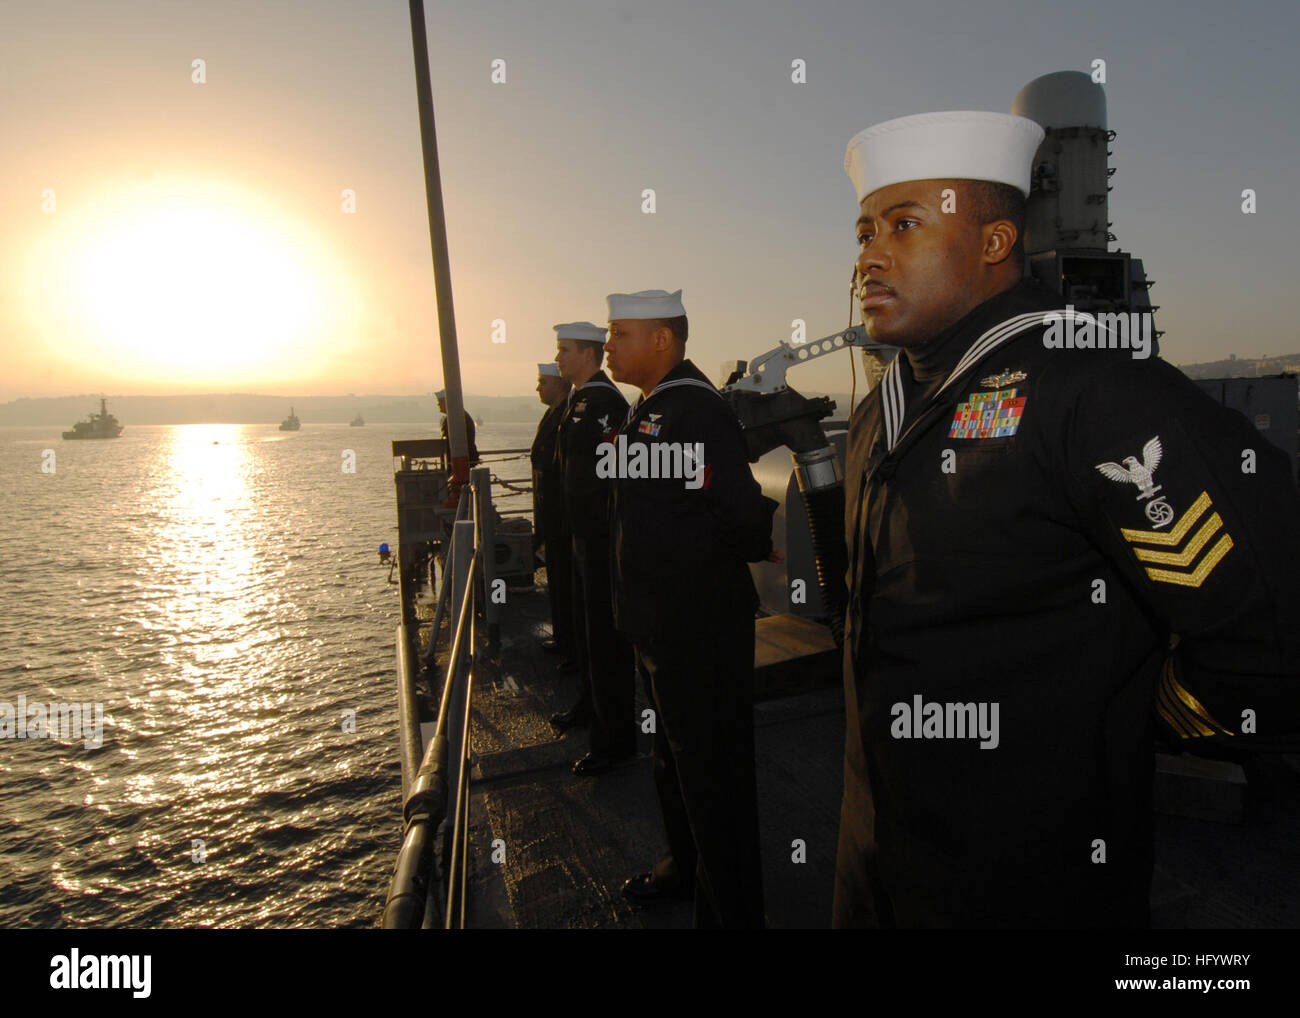 110624-N-ZI300-017 VAPLARAISO, Chile (June 24,2011) Gas Turbine Systems Technician (Mechanical) 1st Class Vincent McKoy mans the rails aboard the guided-missile frigate USS Boone (FFG 28) while arriving in Valparaiso, Chile, for a scheduled port visit. Boone will join USS Thach (FFG 43) to participate in the Chilean-hosted Pacific phase of UNITAS 52. Boone is deployed to South America supporting Southern Seas 2011. (U.S. Navy photo by Mass Communications Specialist 1st Class Steve Smith/Released) US Navy 110624-N-ZI300-017 Gas Turbine Systems Technician (Mechanical) 1st Class Vincent McKoy man Stock Photo